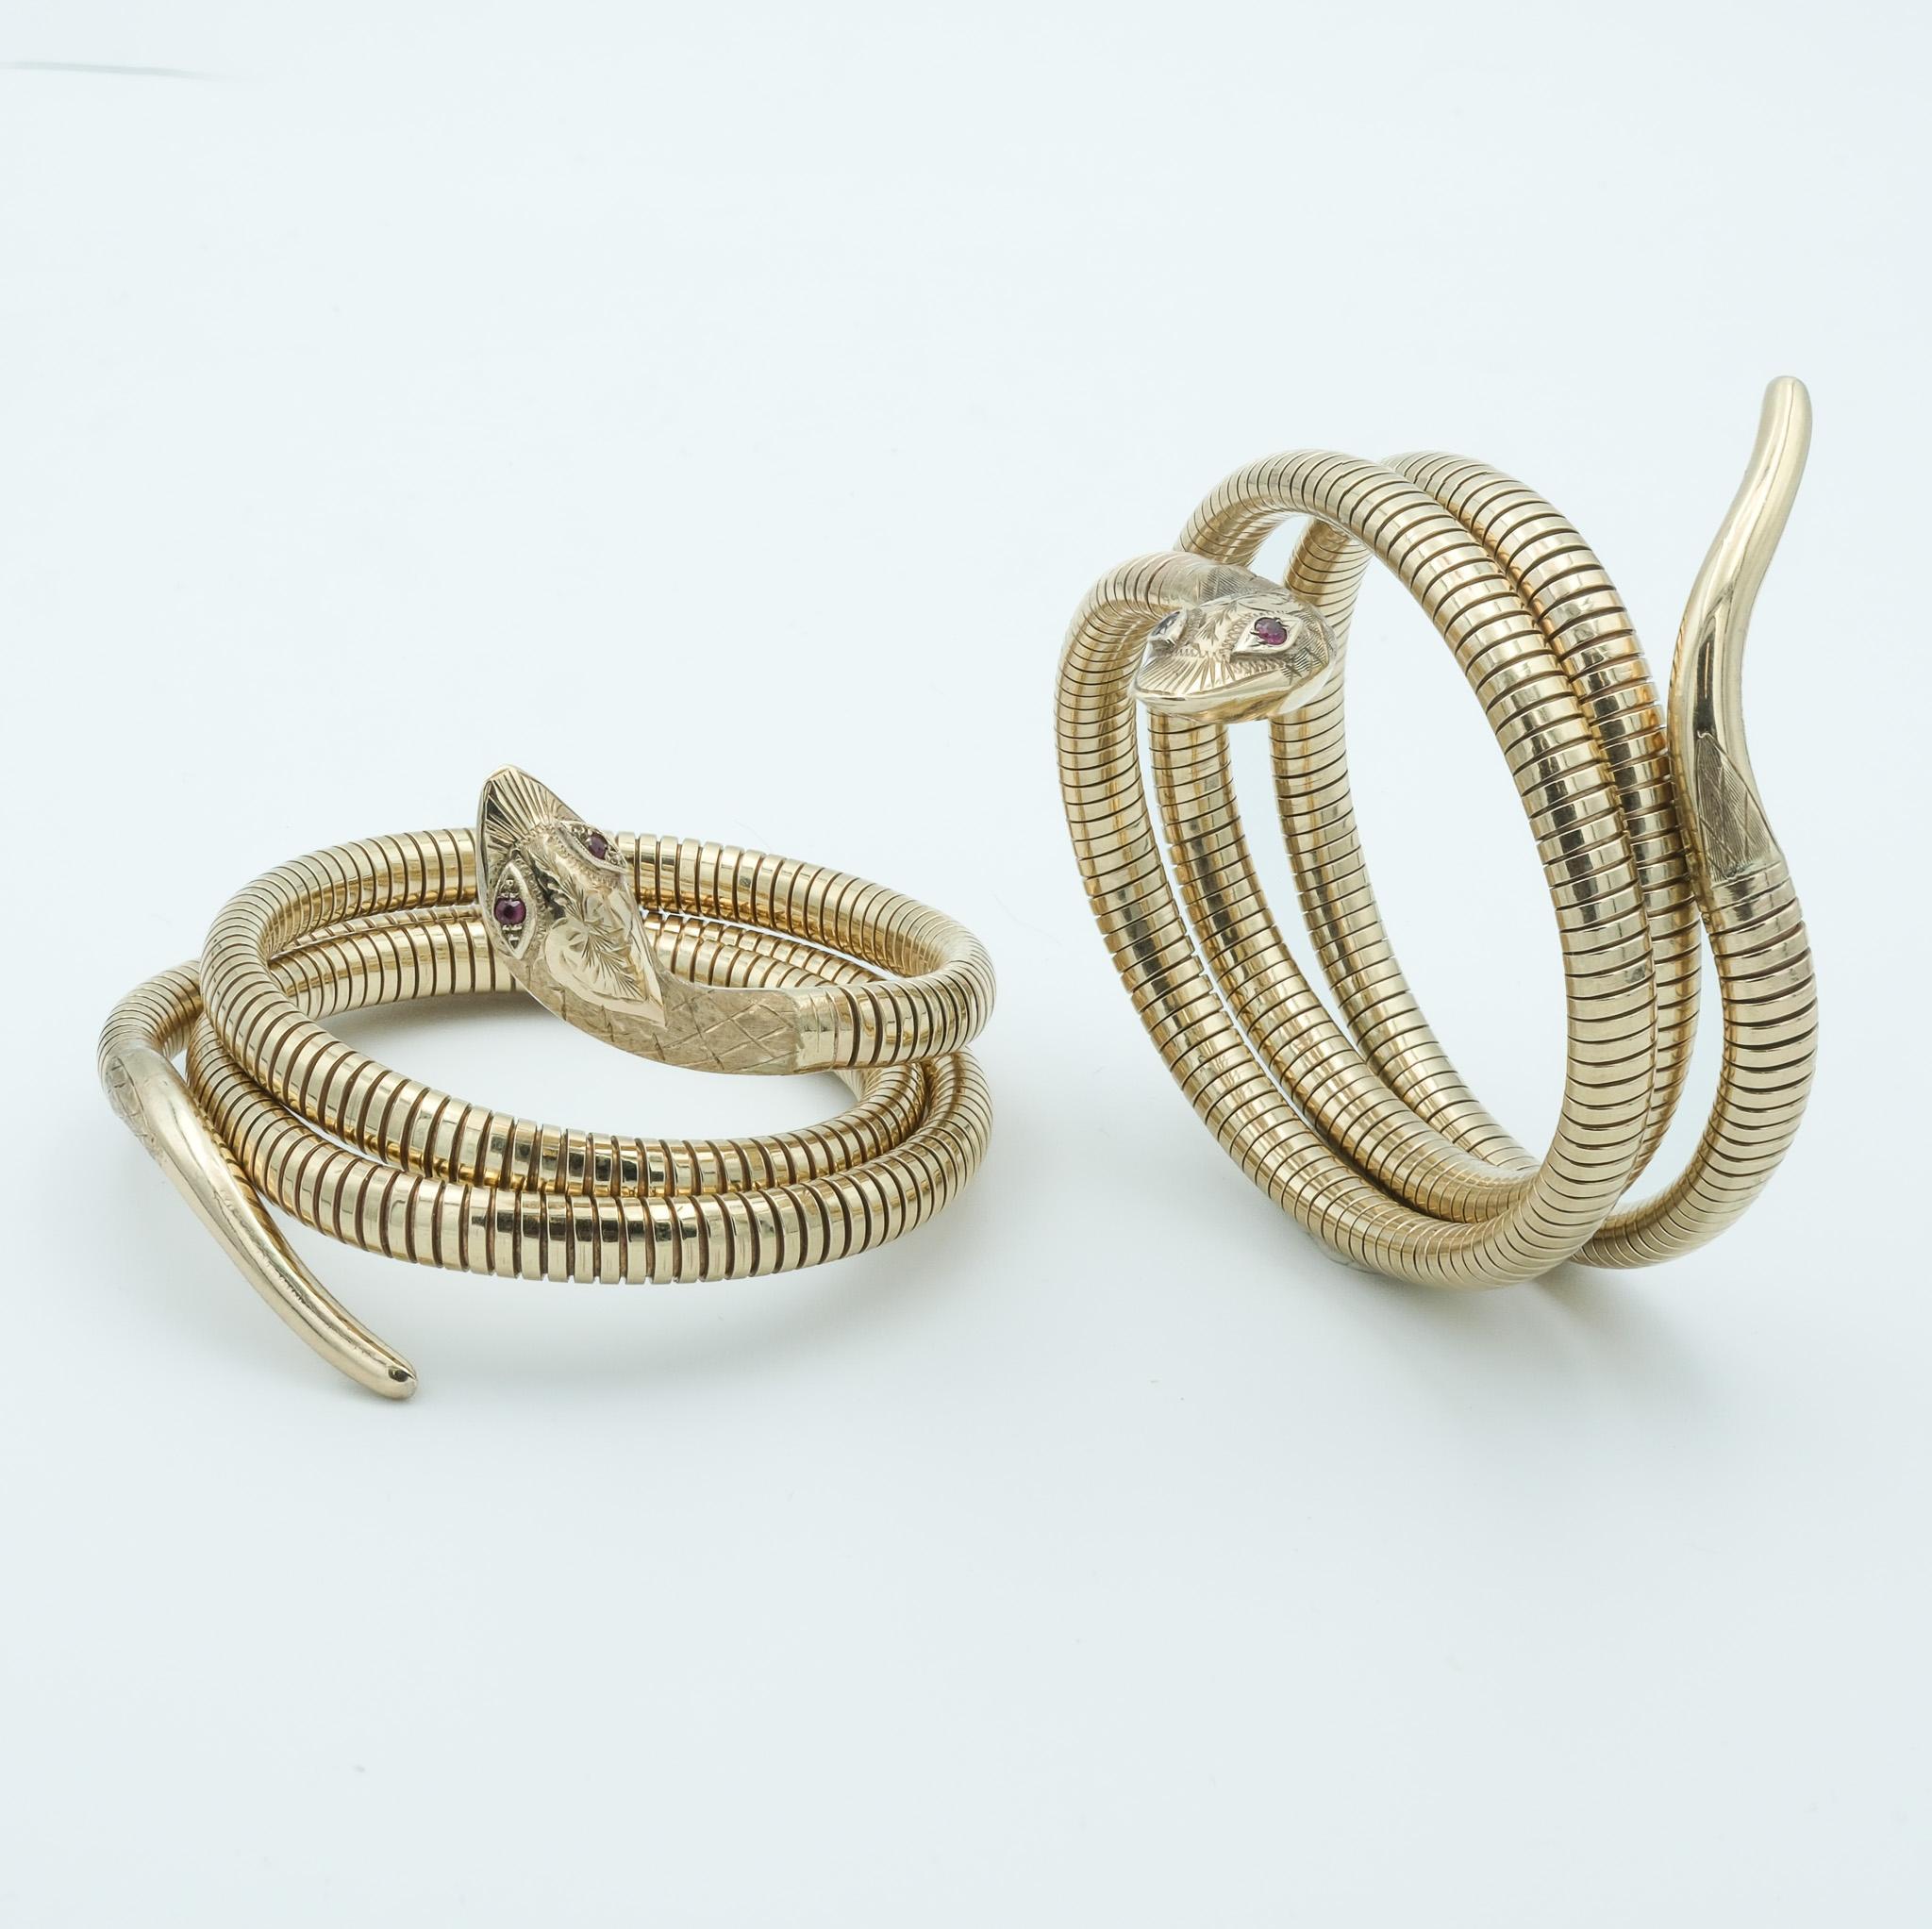 These are two exquisite 1960s English Birks 9k rose gold snake bracelets, each meticulously crafted to resemble the sinuous form of a serpent. The design captures the essence of the 1960s fascination with bold and elegant motifs. Both bracelets have